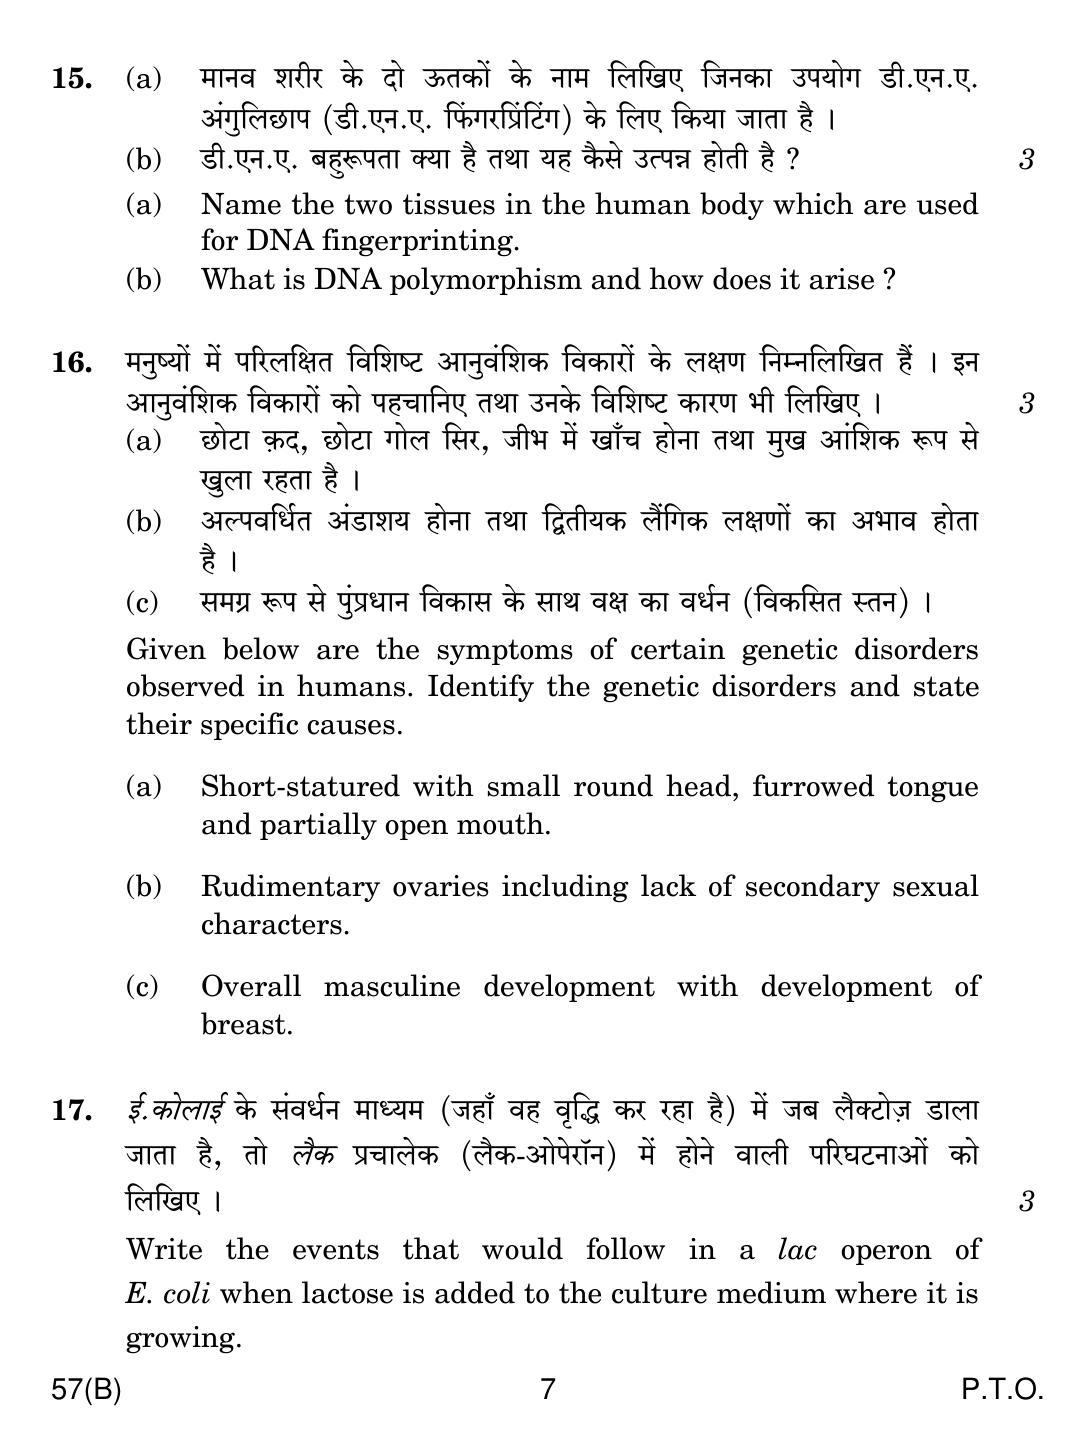 CBSE Class 12 57(B) BIOLOGY 2019 Compartment Question Paper - Page 7